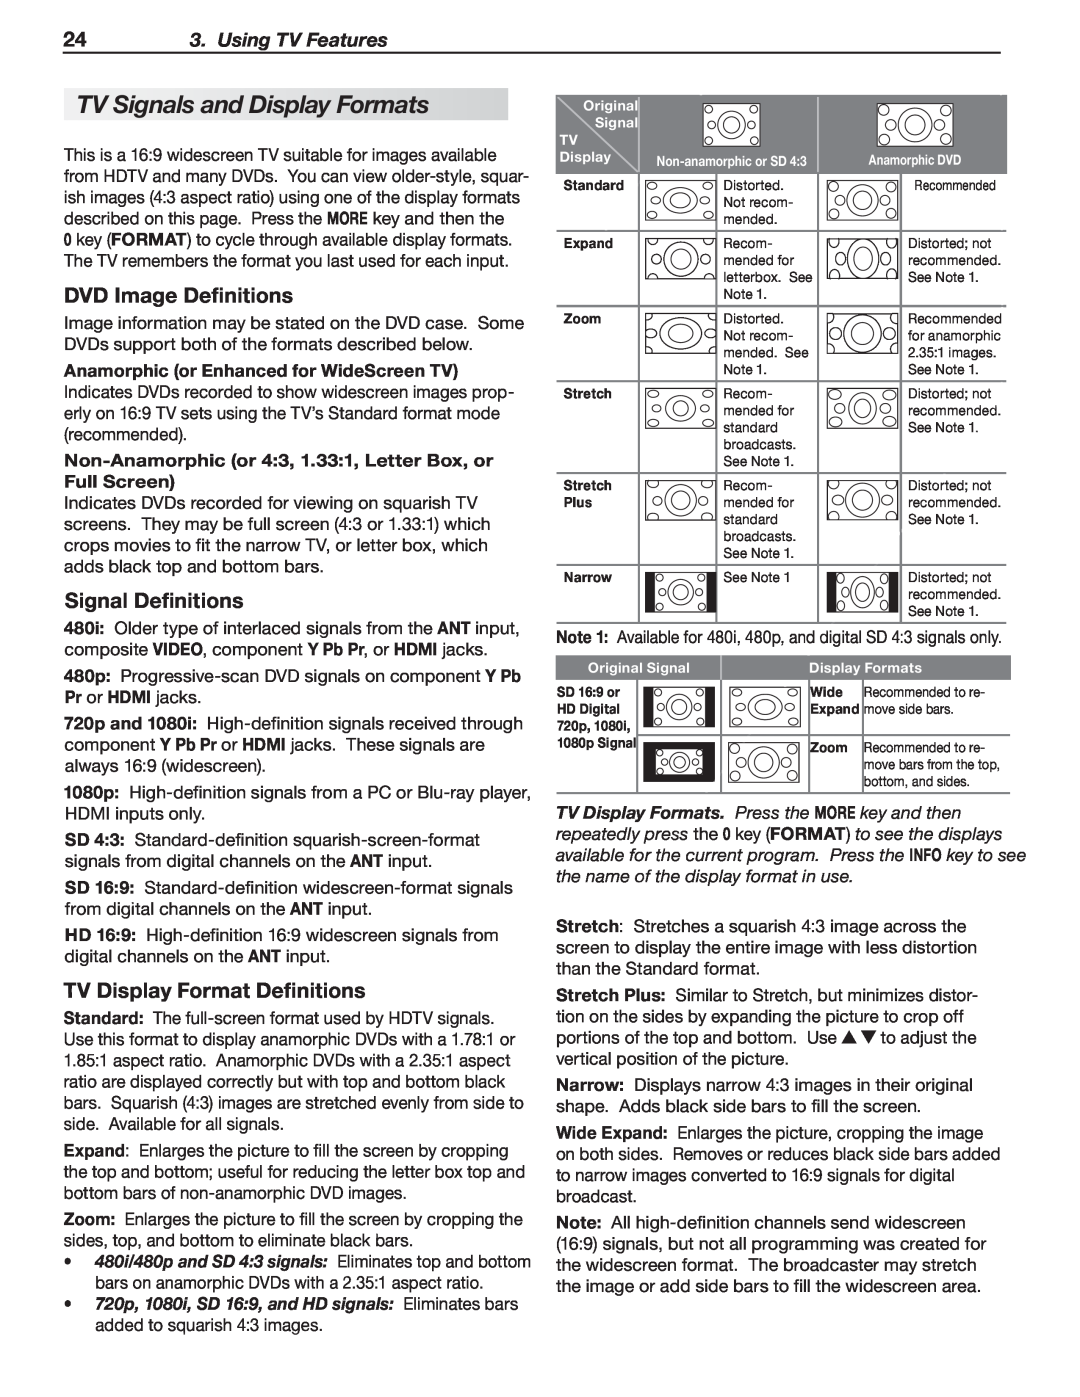 Mitsubishi Electronics 837 TV Signals and Display Formats, DVD Image Definitions, Signal Definitions, Using TV Features 